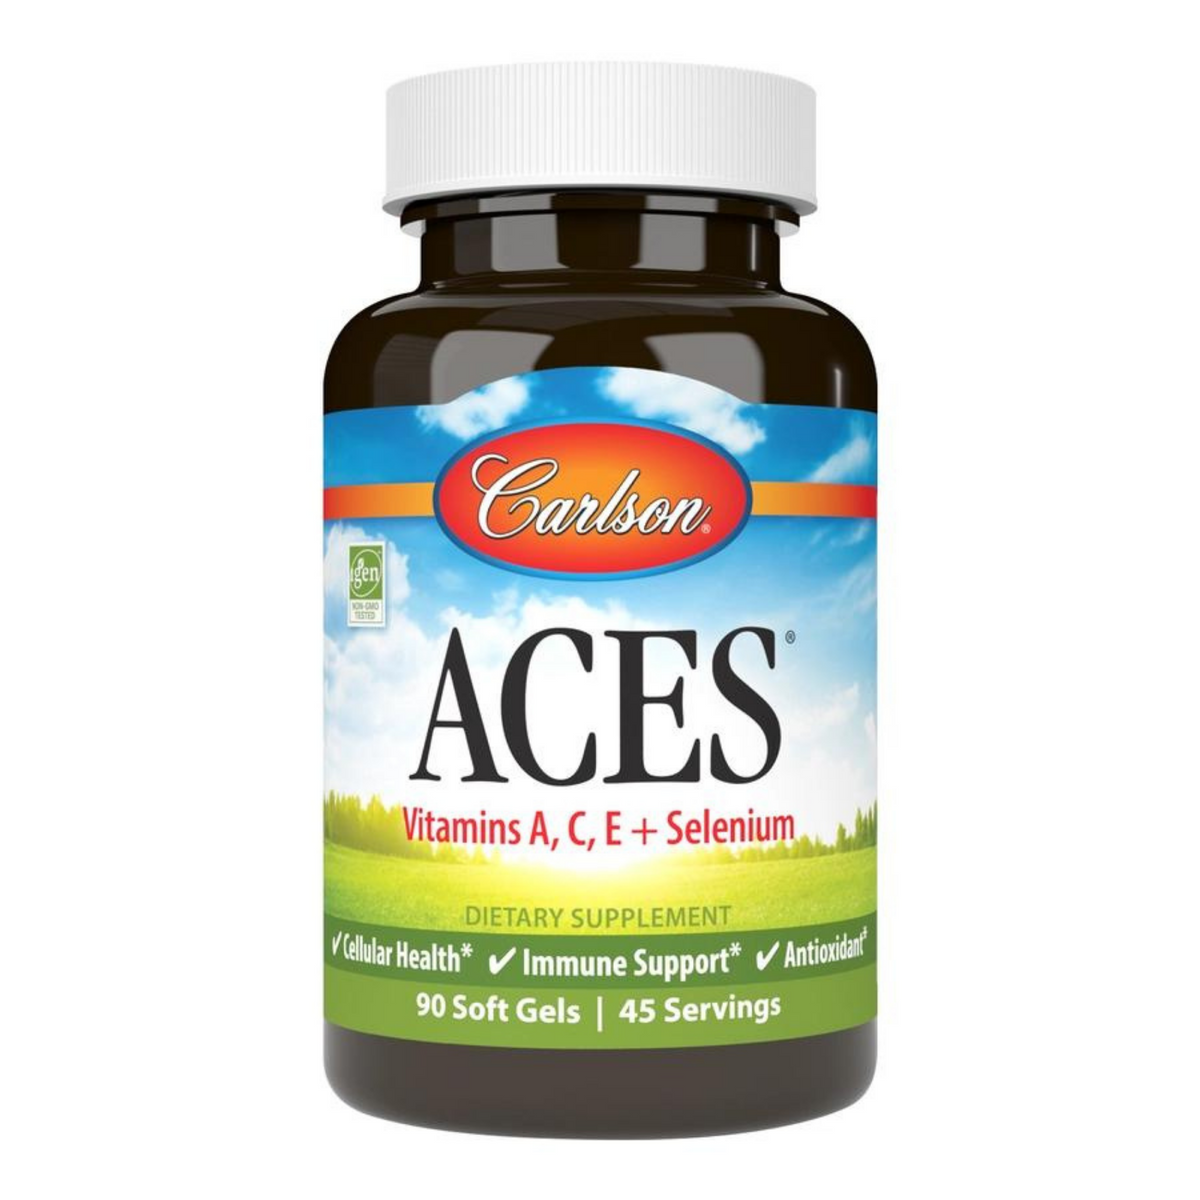 Primary Image of ACES 90